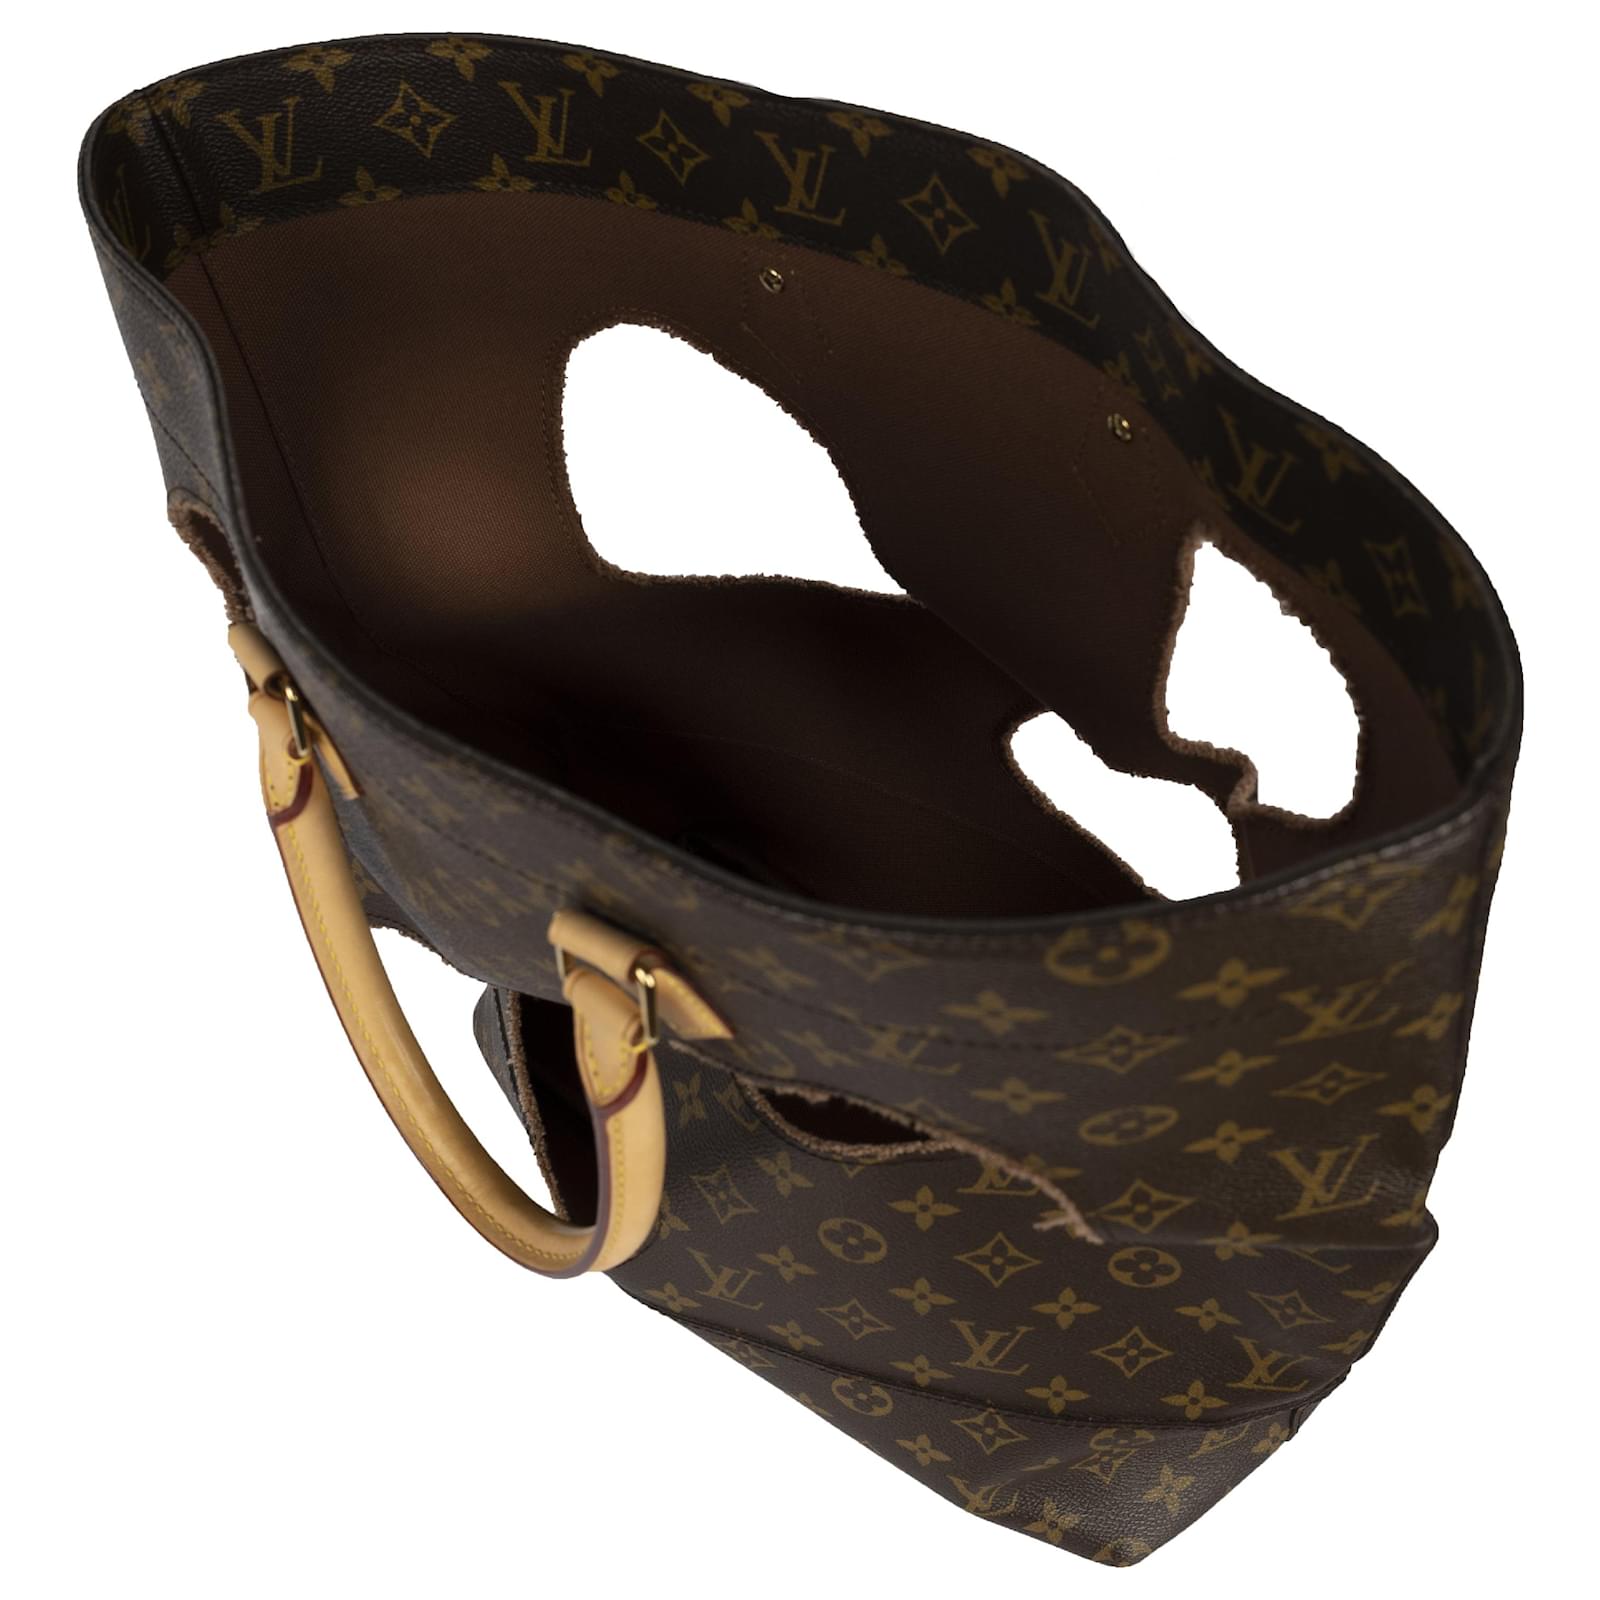 This Louis Vuitton Monogram Tote Comes With Holes Burned Into It & Costs  $11,757 In Case You Have Cash To Burn 